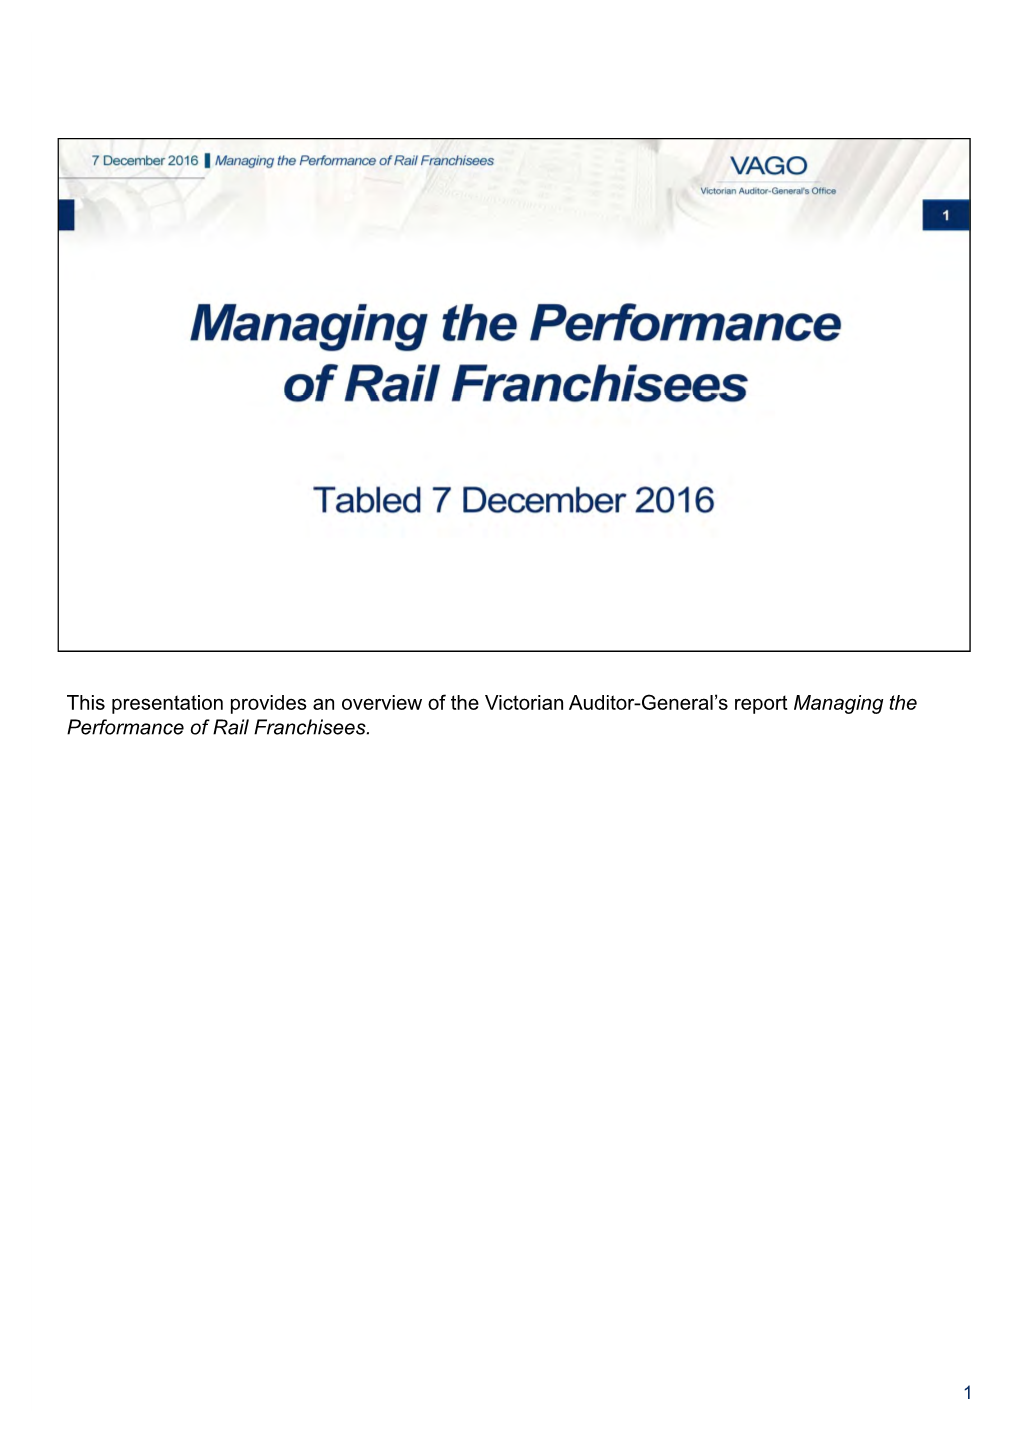 Managing the Performance of Rail Franchisees Recorded